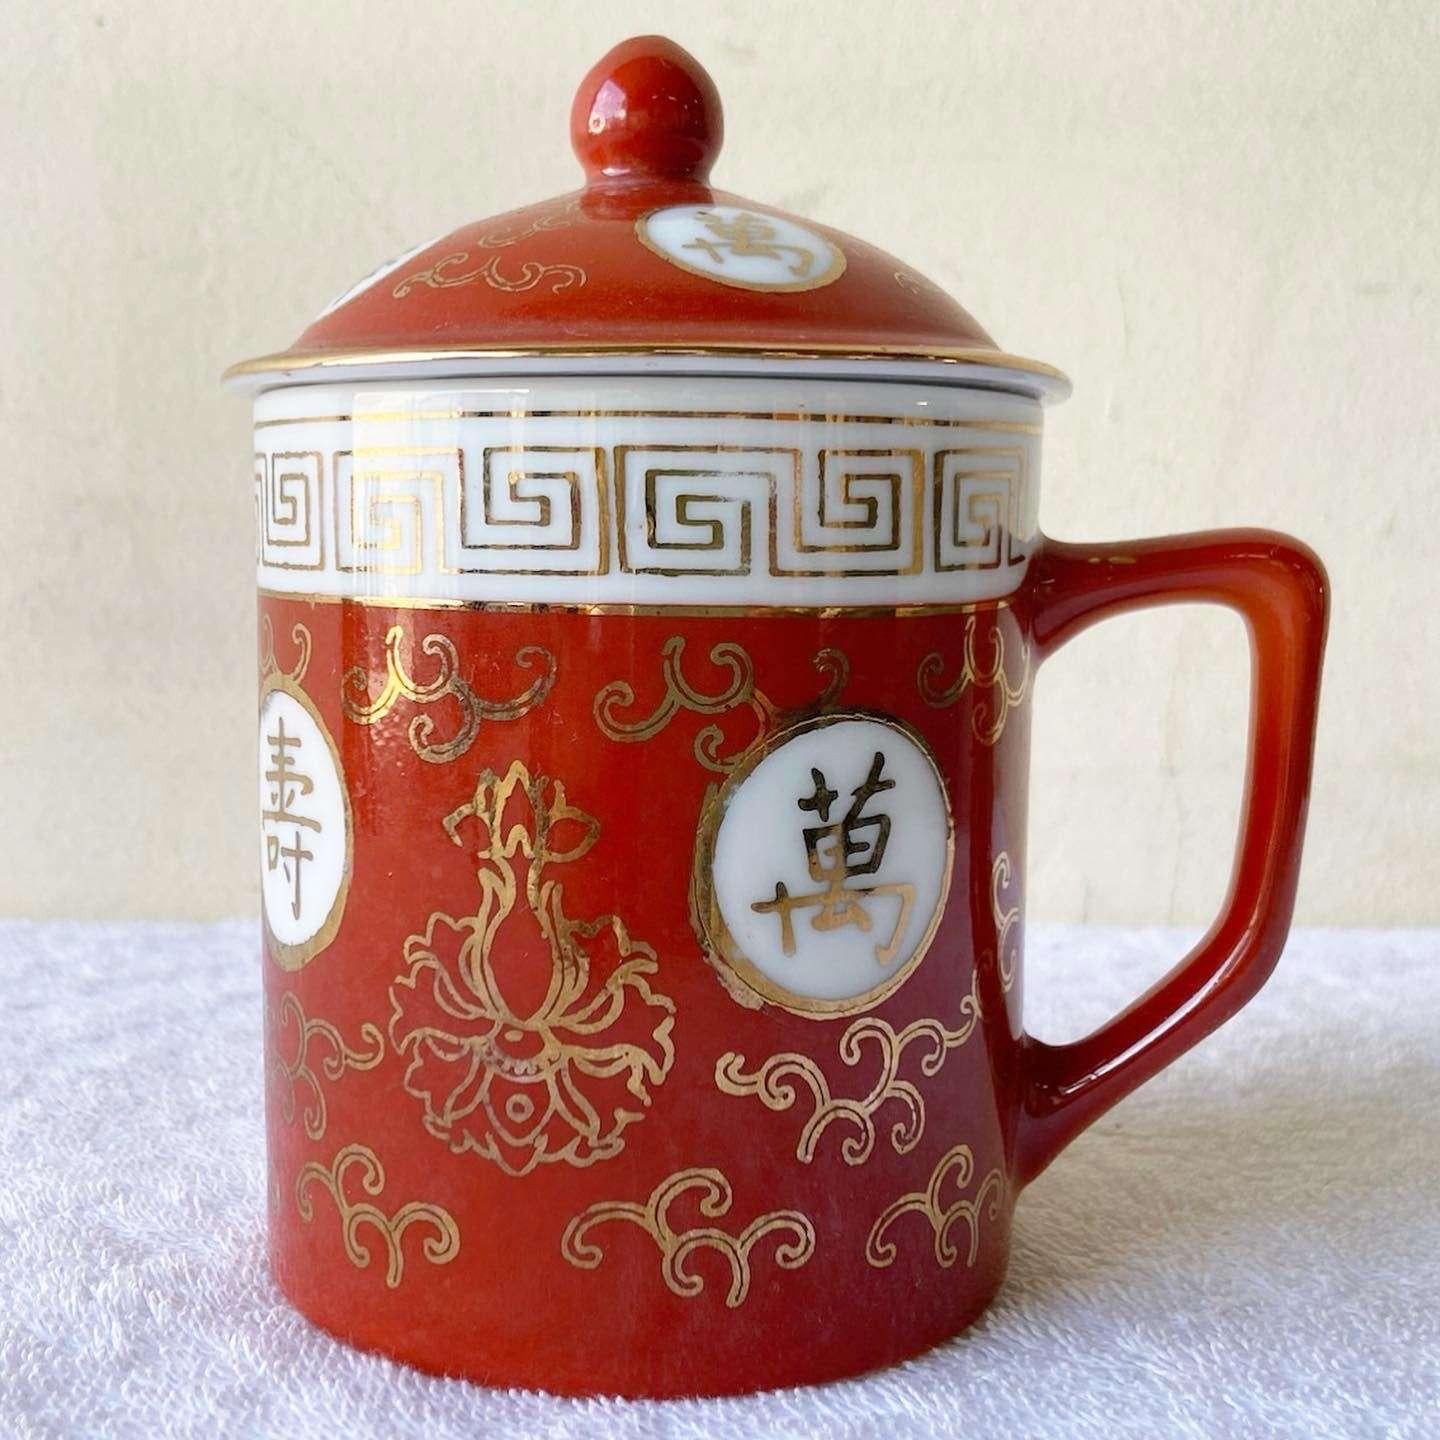 Wonderful vintage Chinese porcelain tea cup with lid. Features a hand painted red and gold design.
